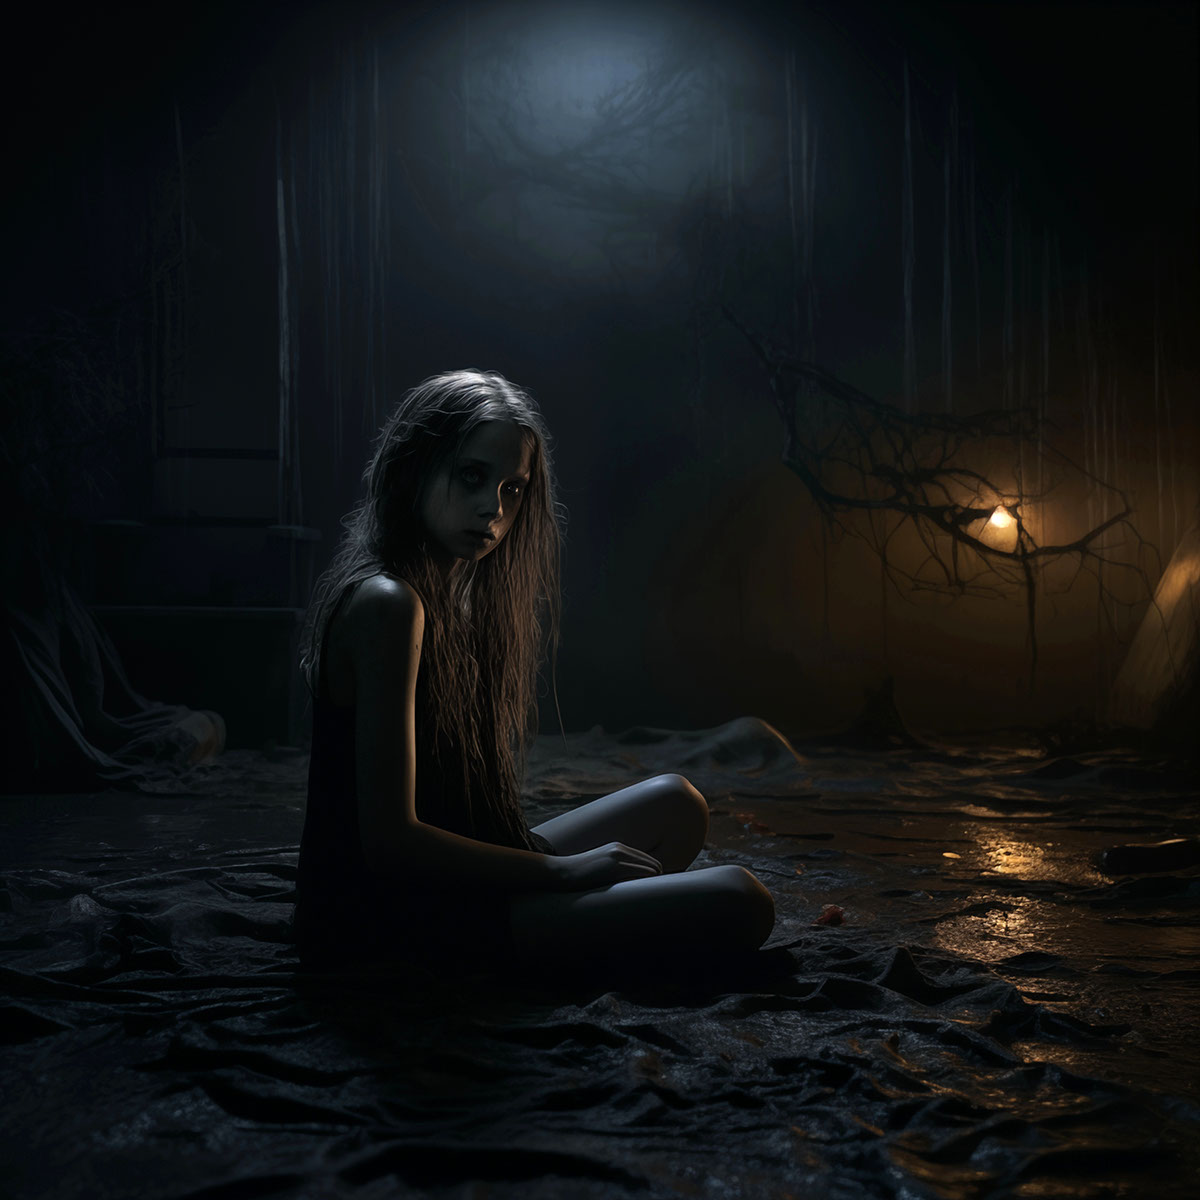 Girl in darkness rendition image